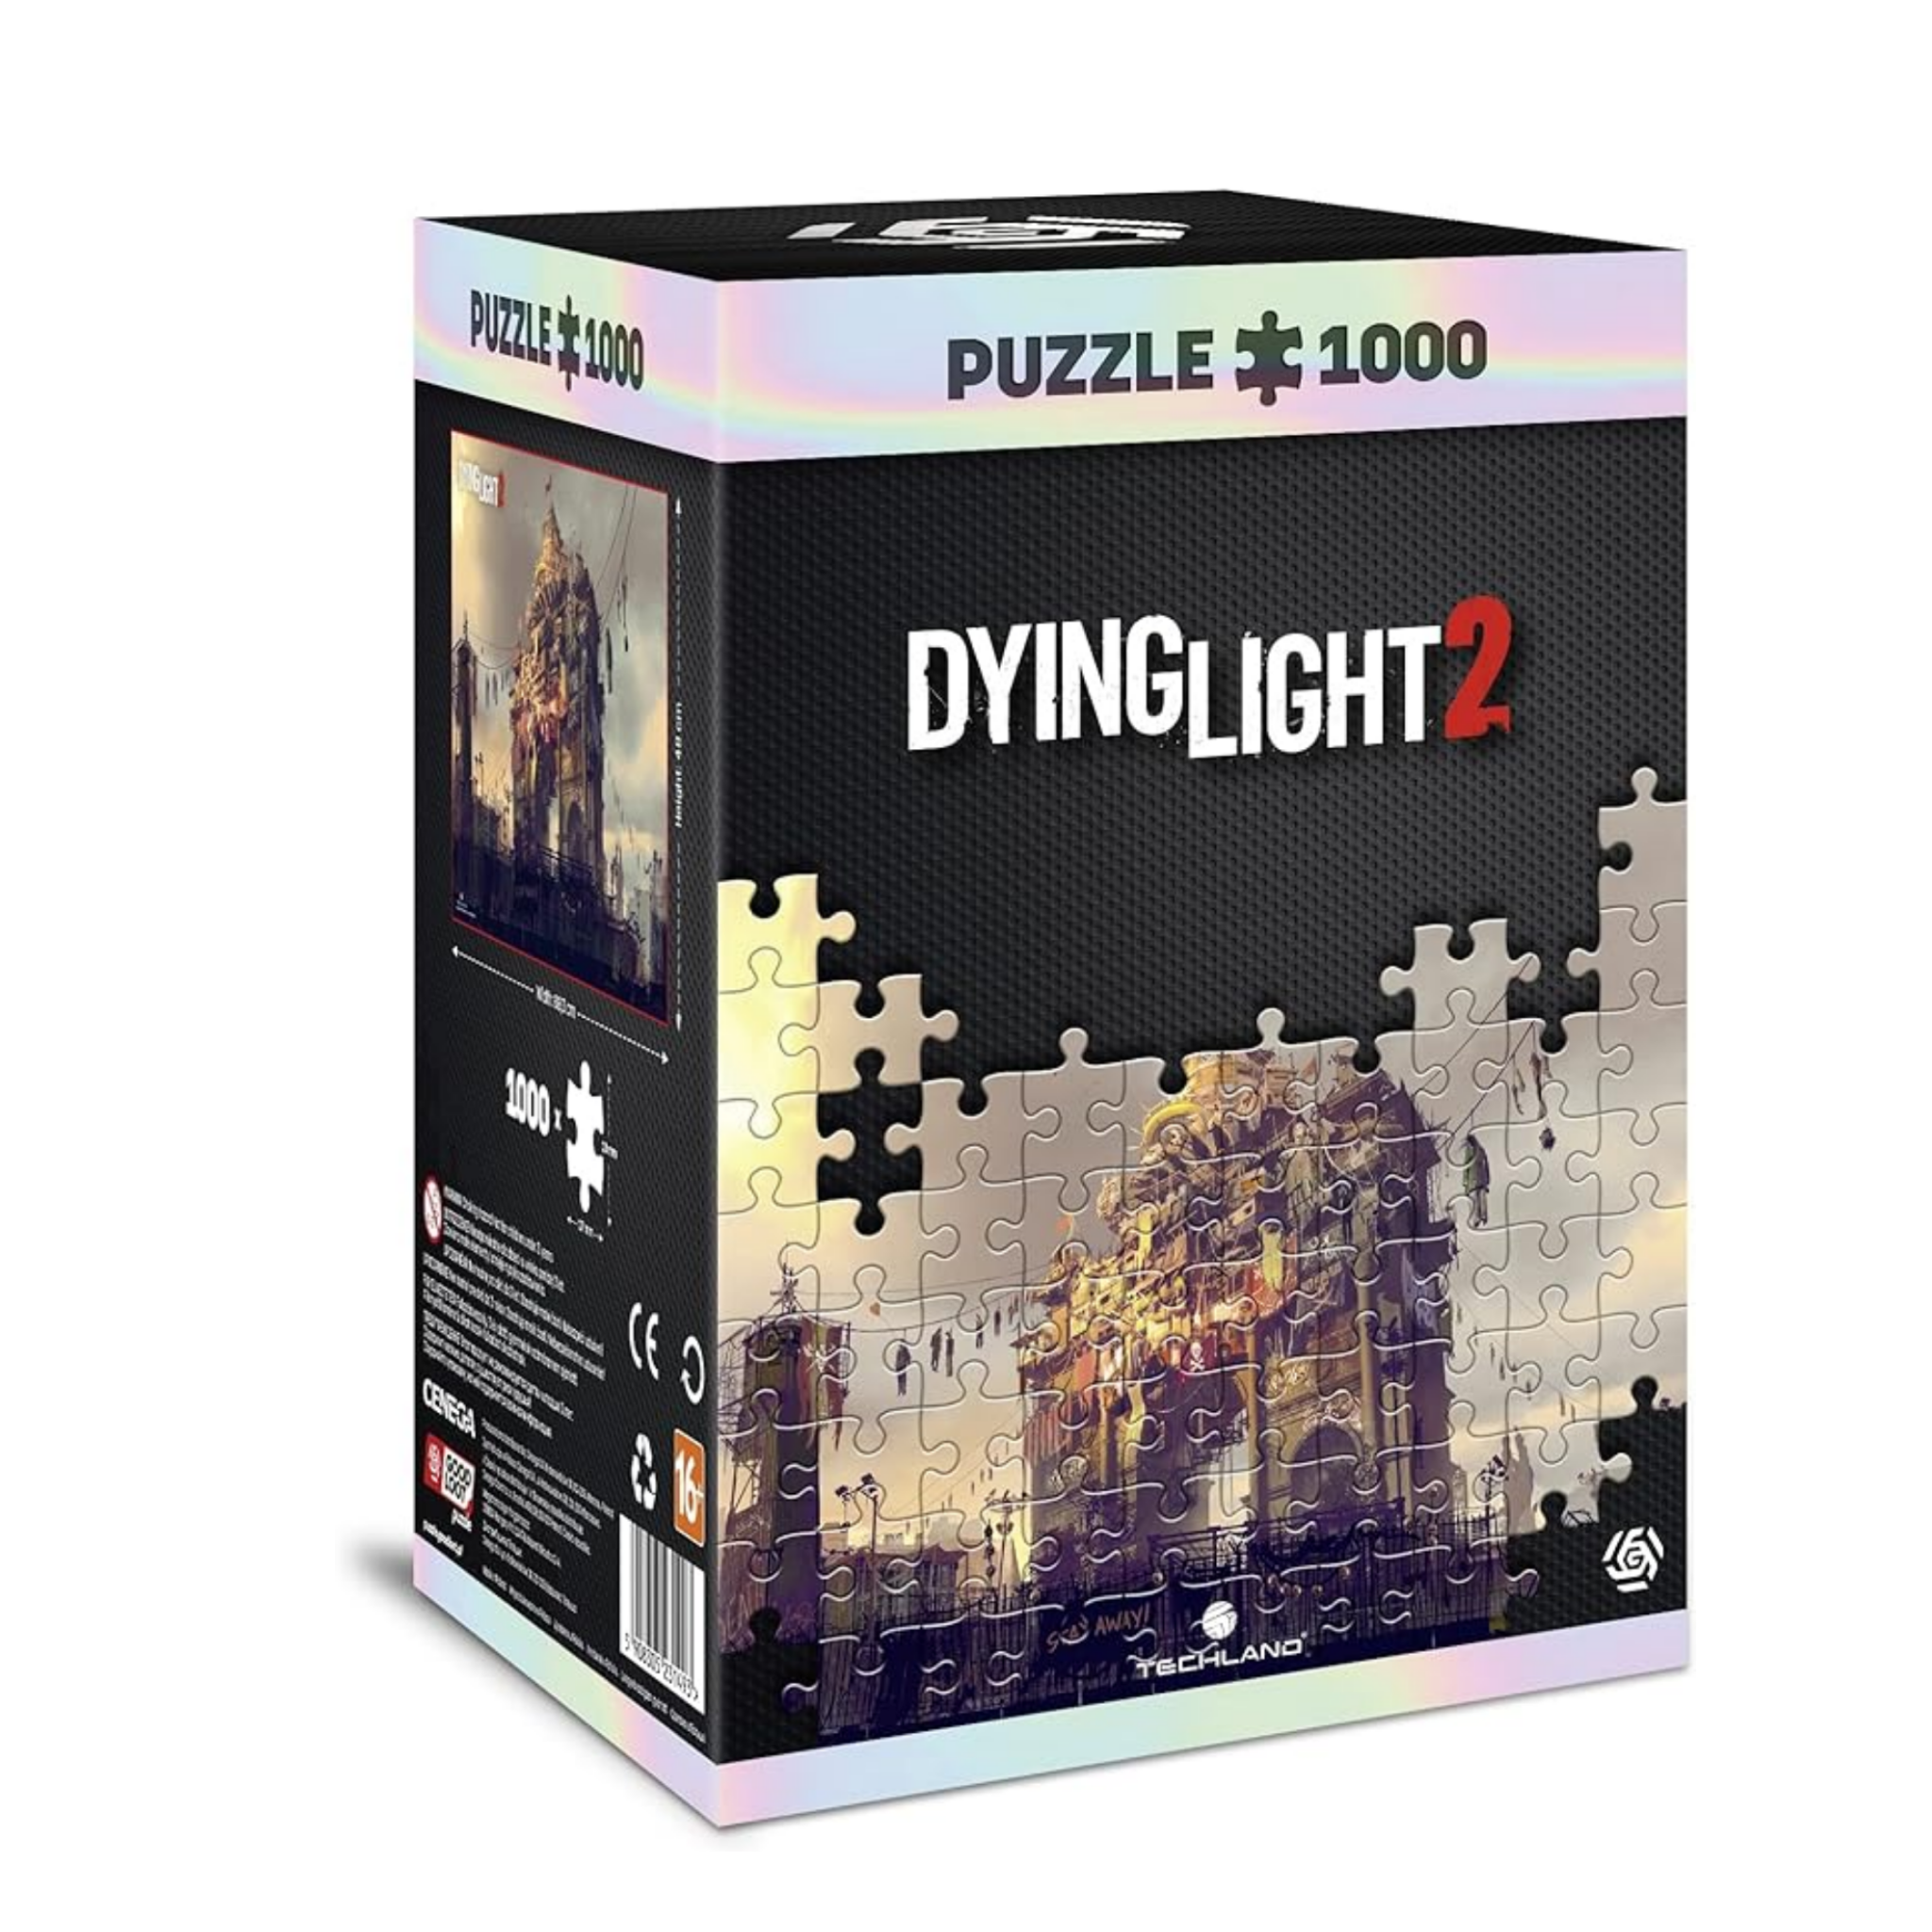 Dying Light 2 Puzzle